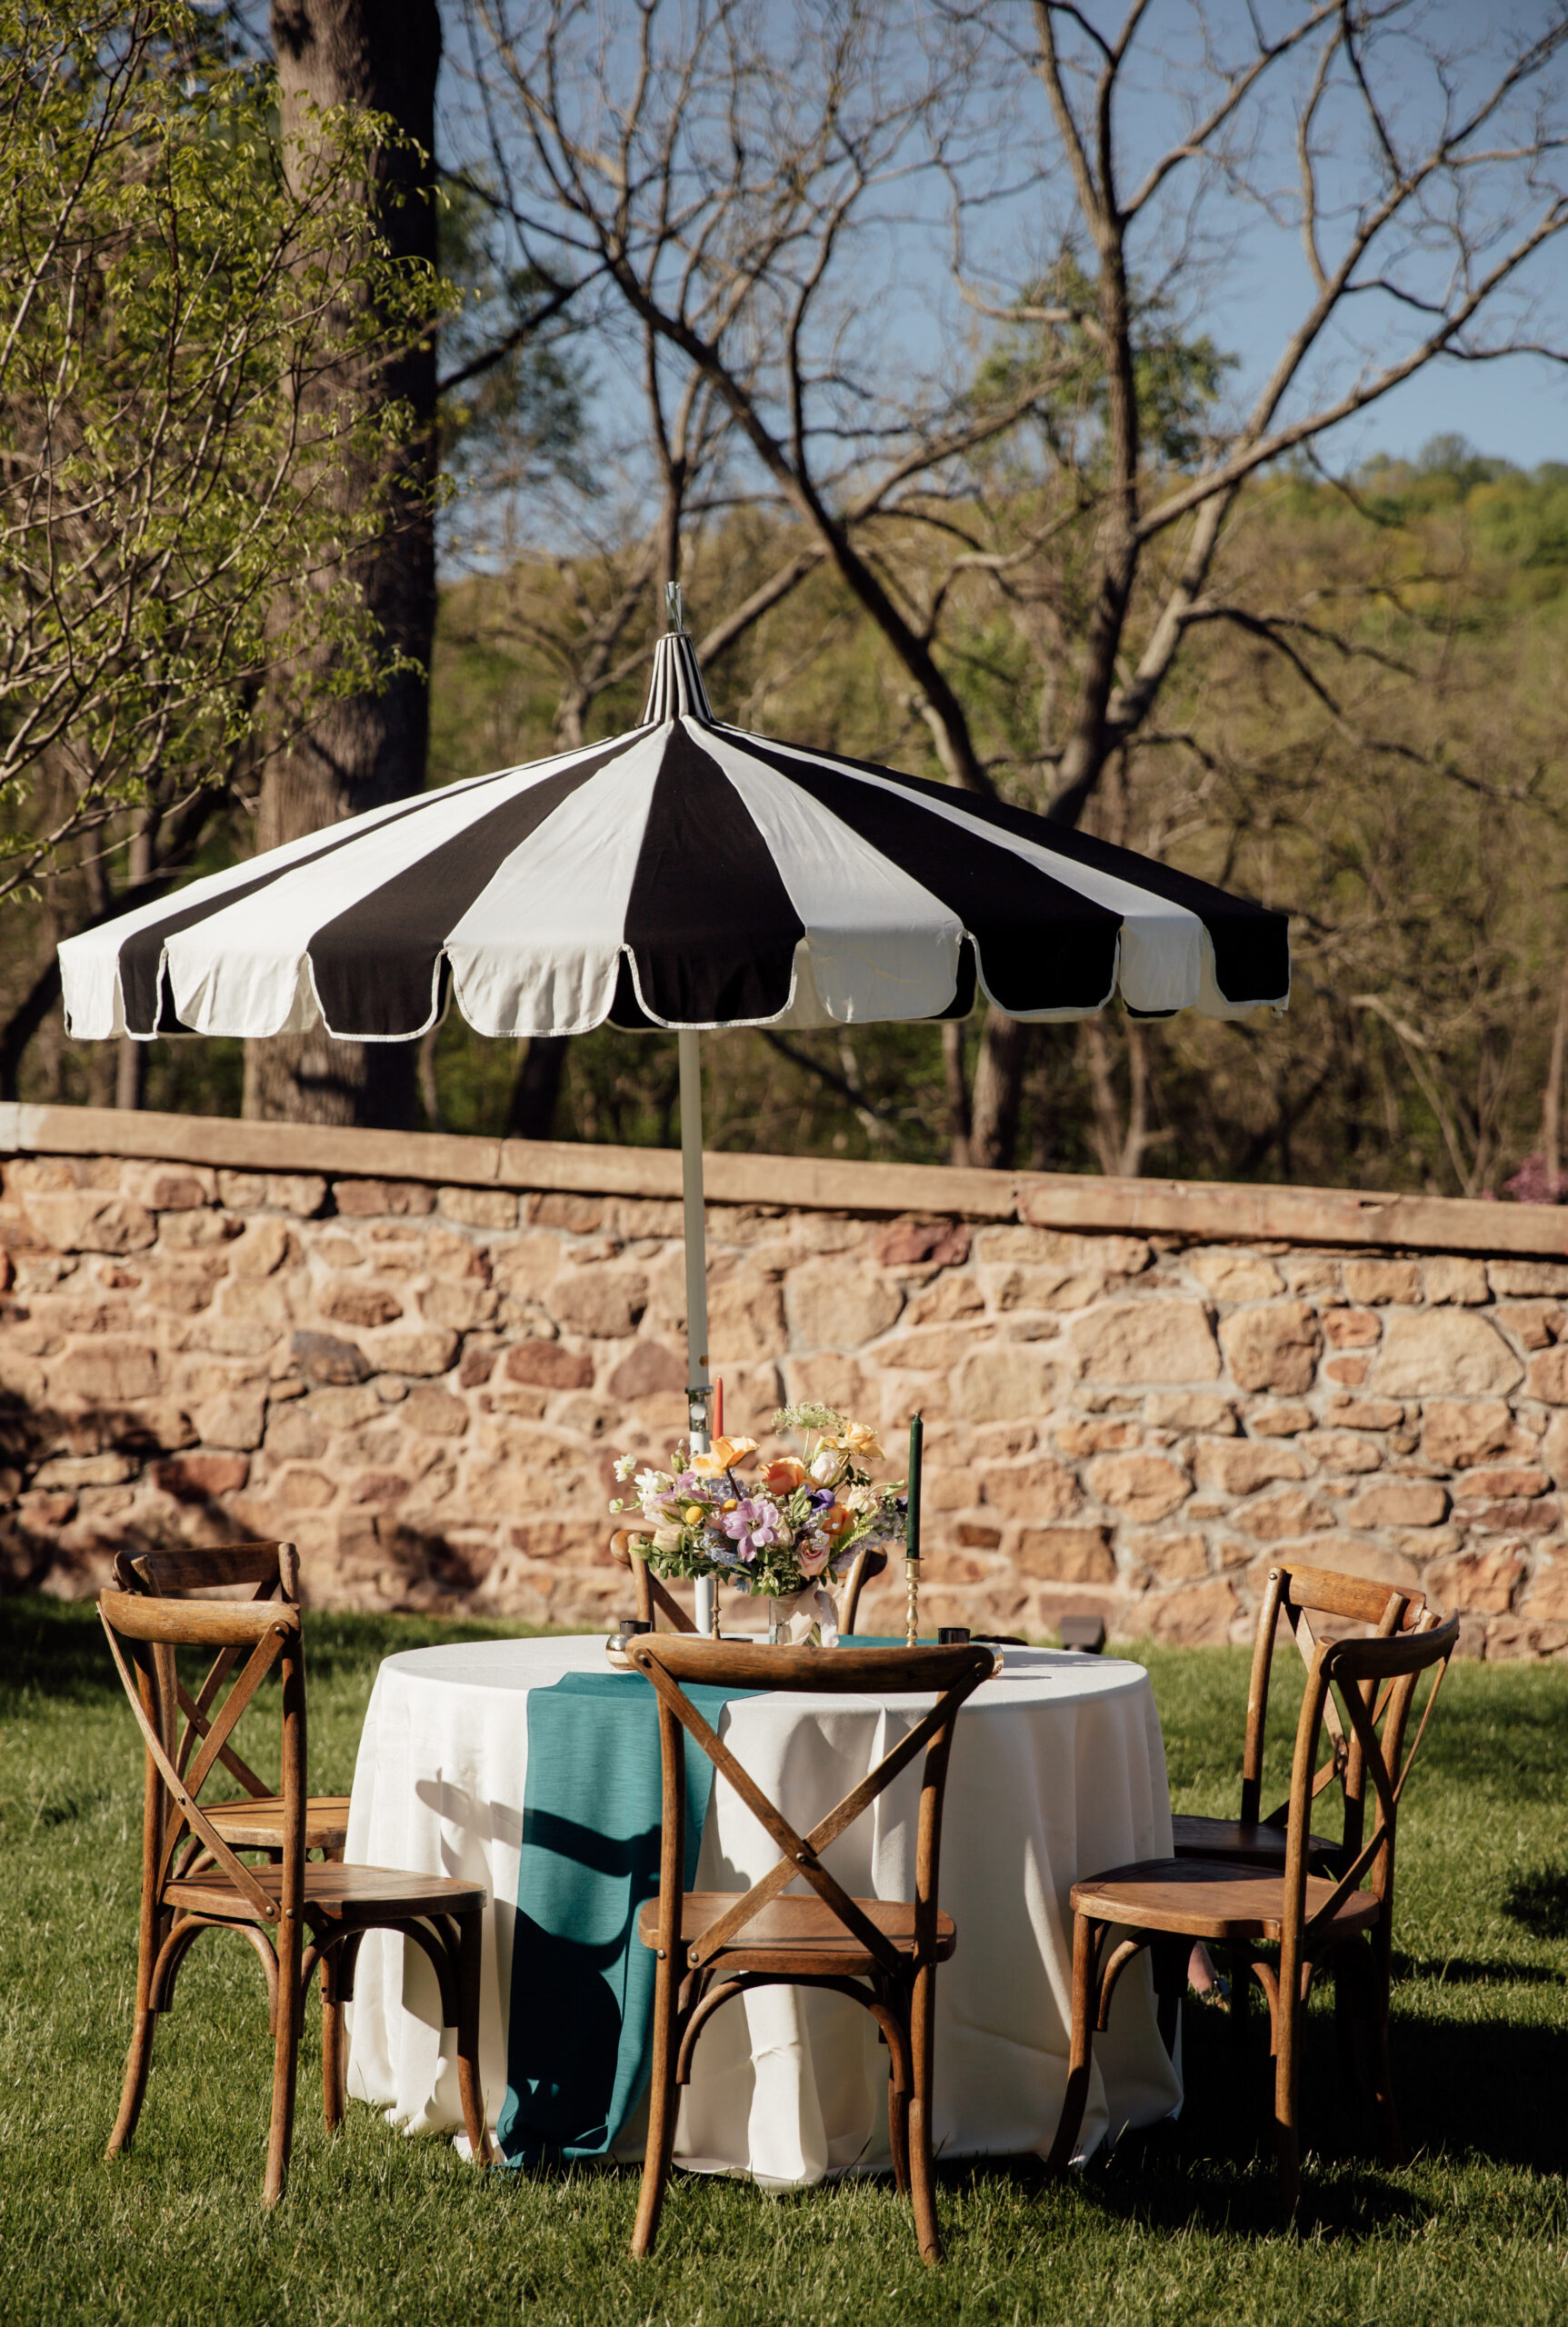 Image of crossback chairs and table with umbrella in courtyard